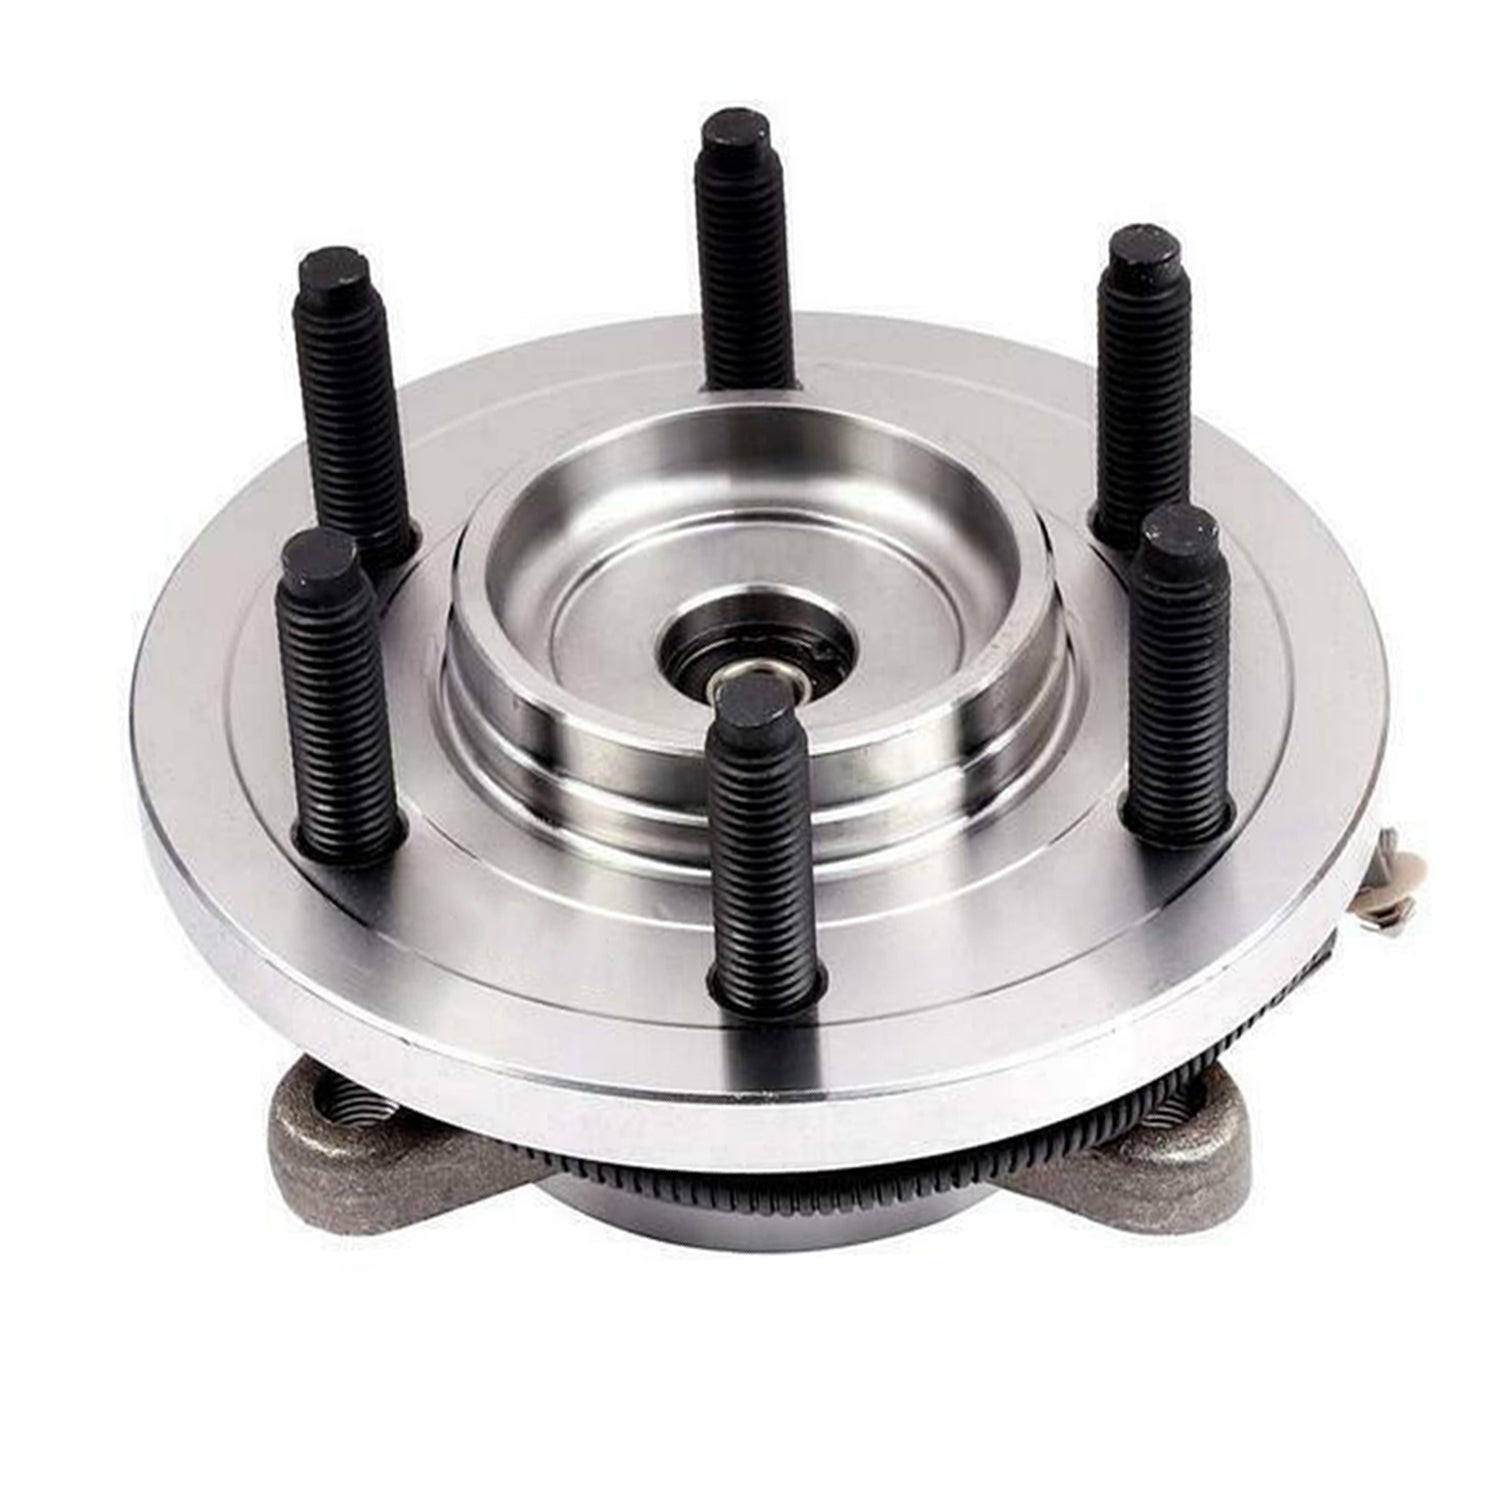 JADODE 515119 4WD Front Wheel Bearing and Hub For 2009 2010 Ford F-150 4.2L 4.6L 5.4L